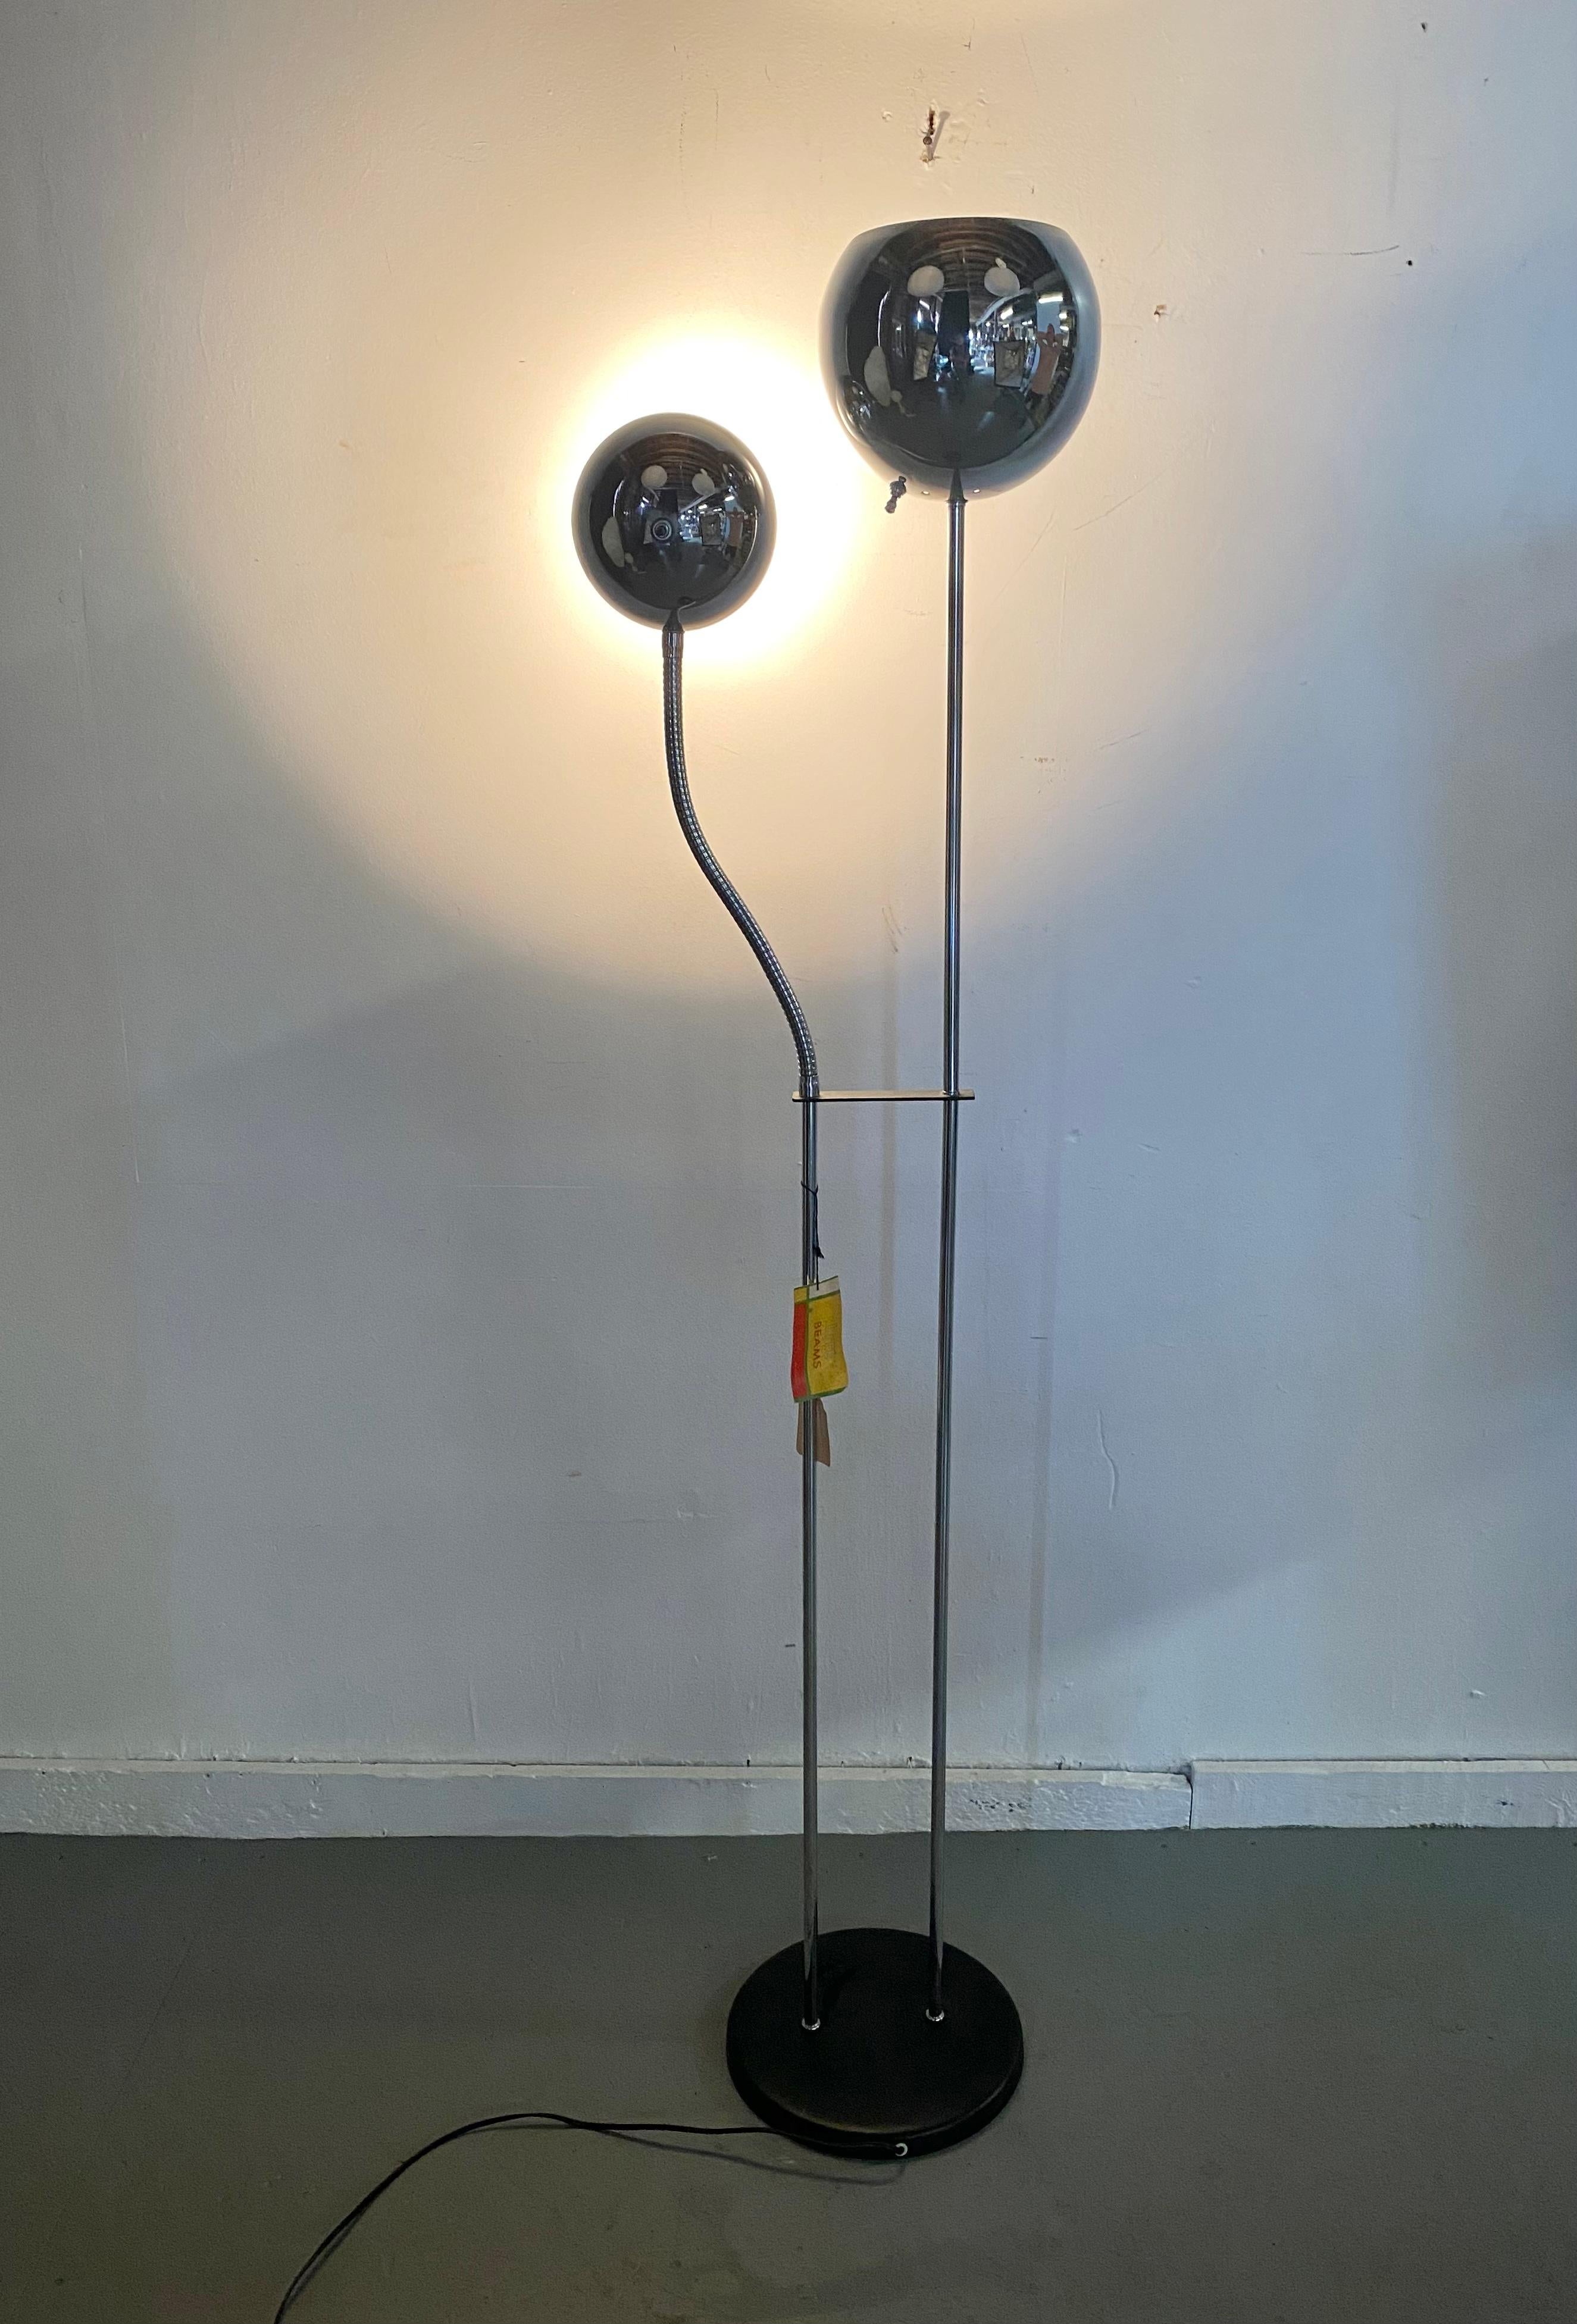 Classic 1970s Space Age double eye-ball chrome floor lamp by LITE BEAMS, very reminiscent of the classic lighting designs by Robert Sonneman, Larger chrome sphere up light, smaller sphere fully adjustable, can be used independently ,perfect for